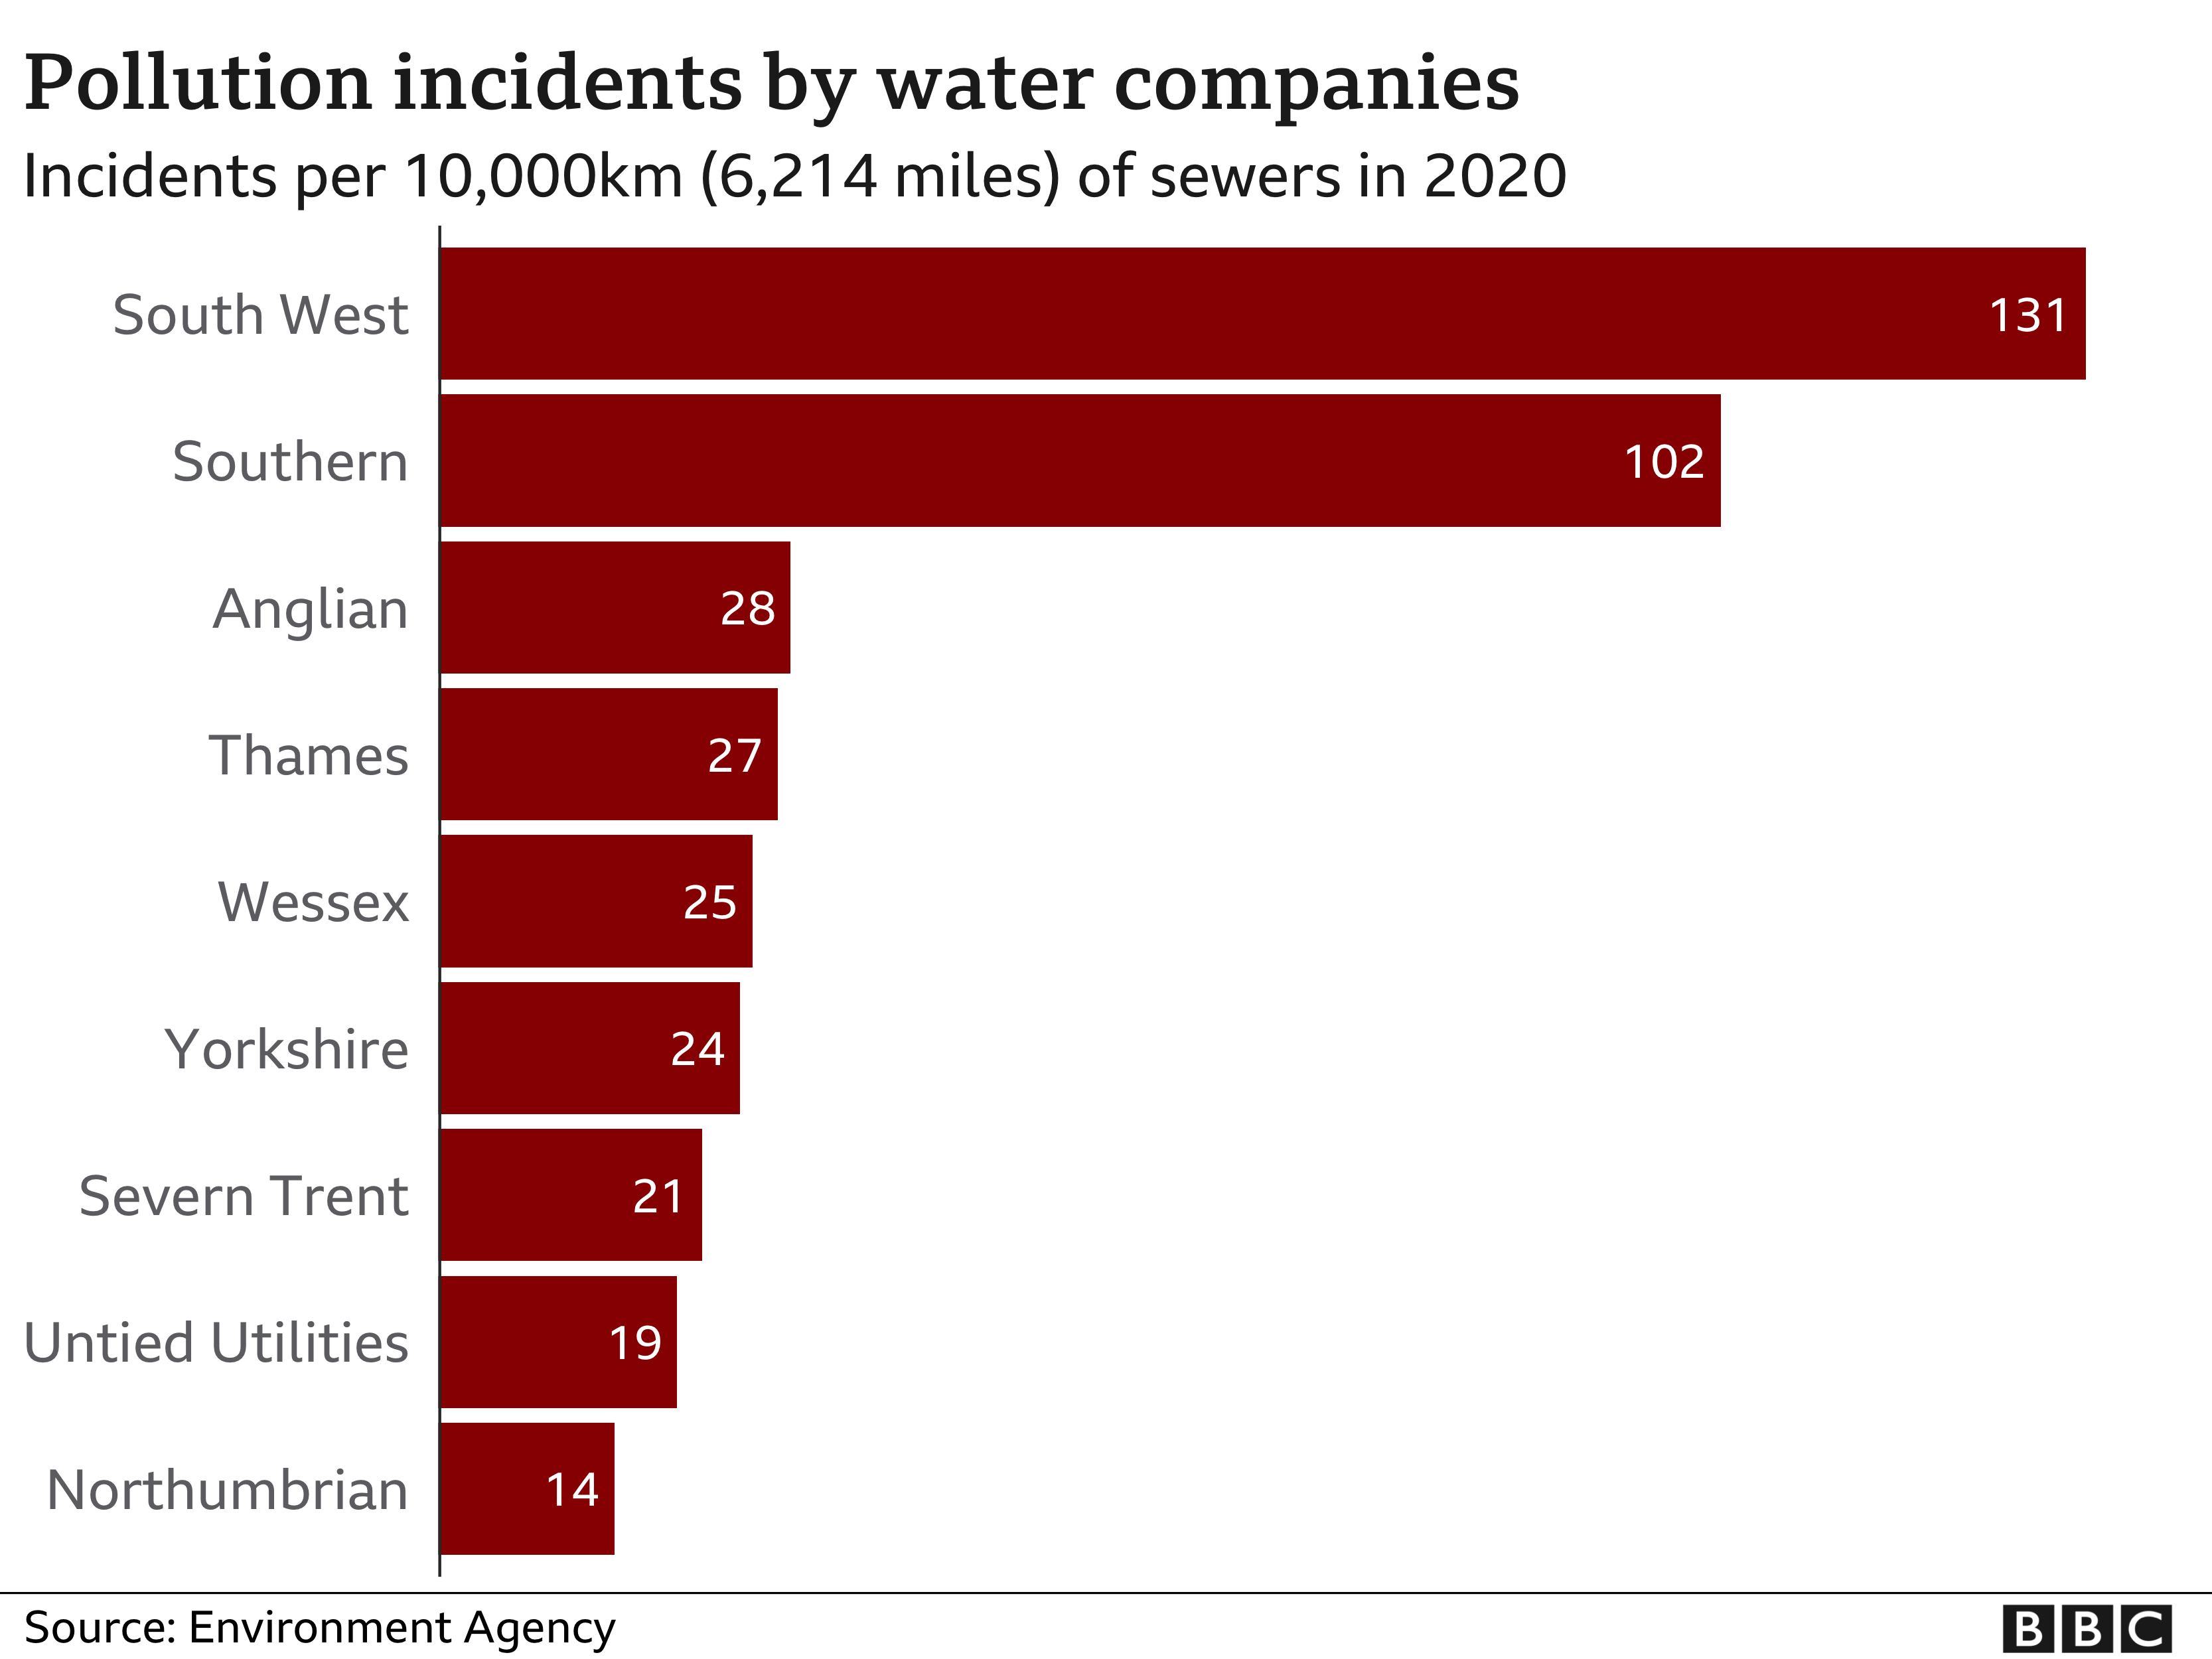 Pollution incidents caused by water companies